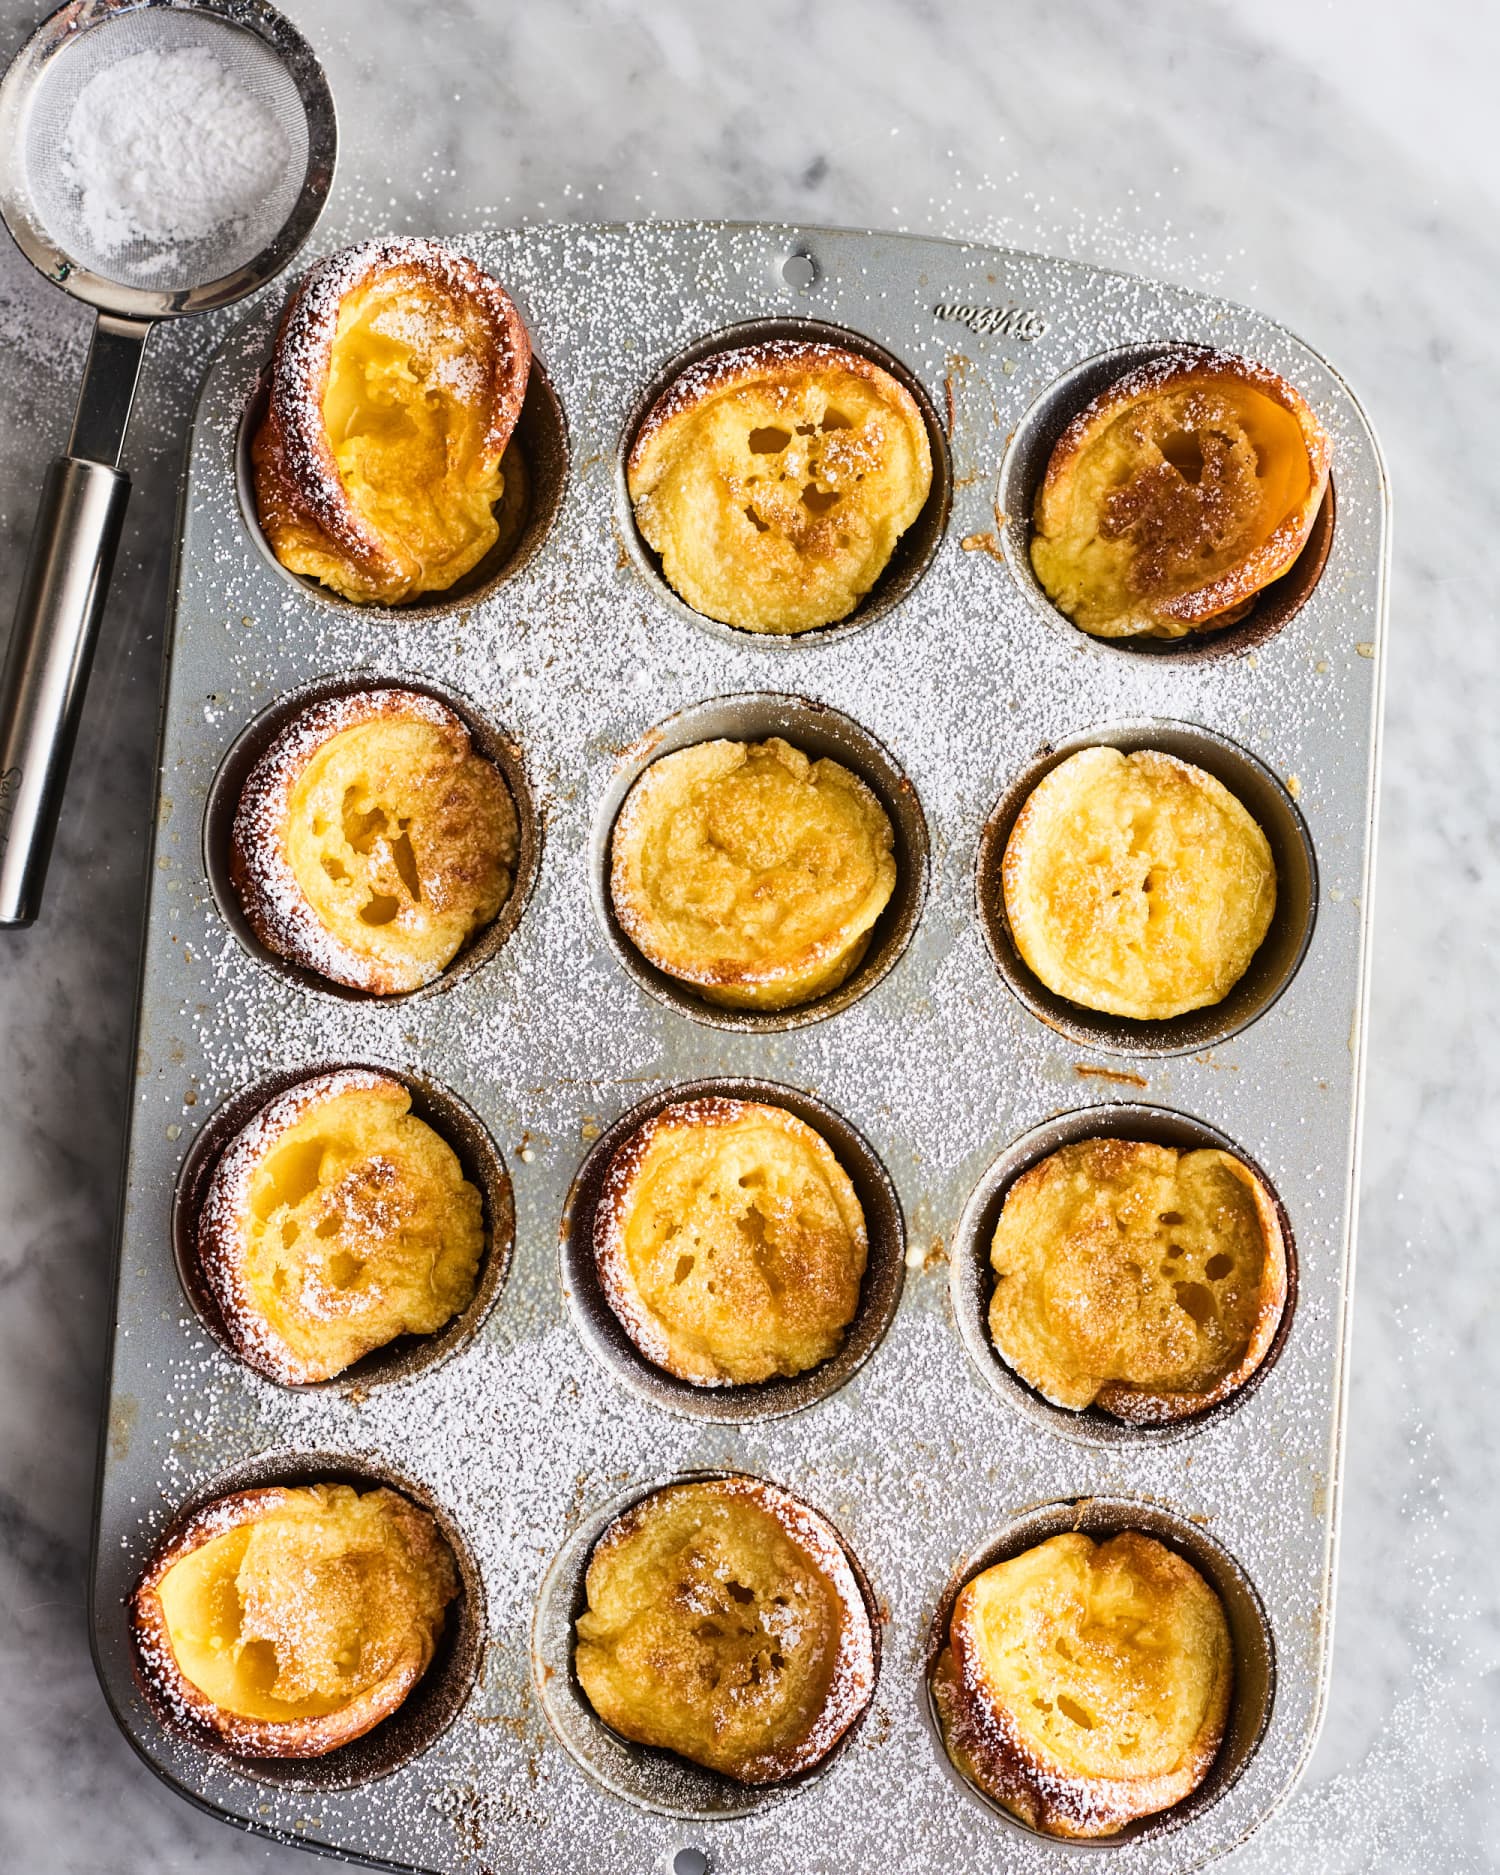 These Adorable Mini Dutch Baby Pancakes Are the Perfect Shape for Holding Jam or Syrup